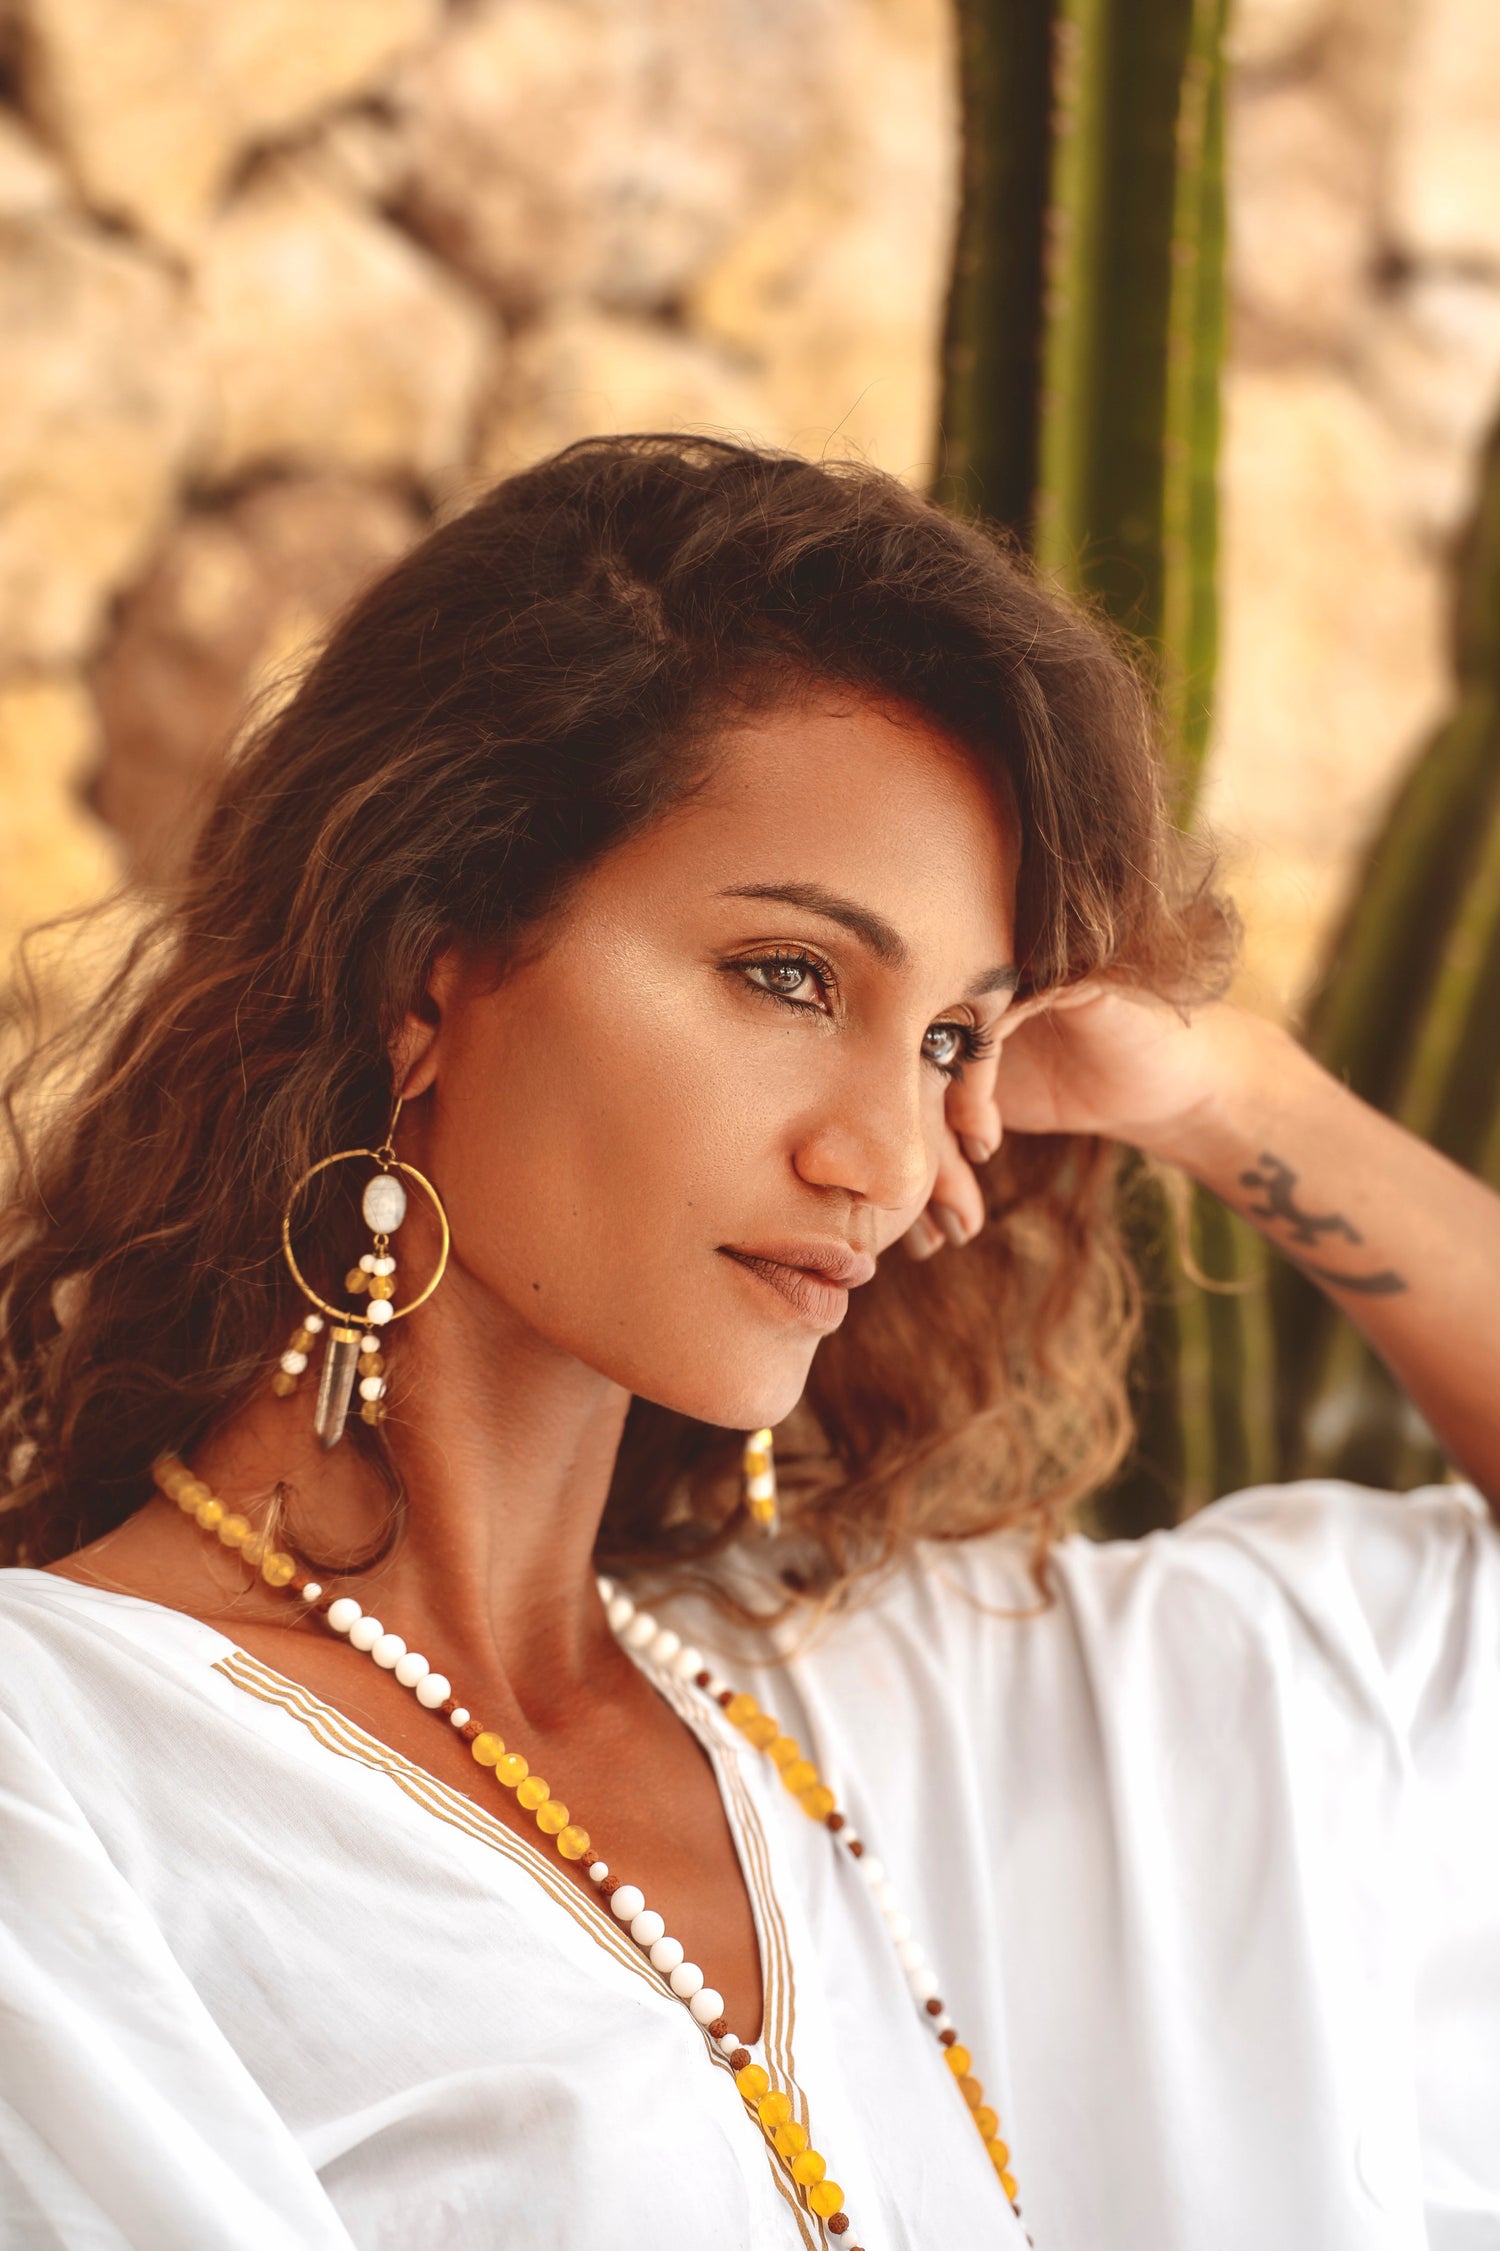 white and gold ritual kaftan phoenix rising with divine mala necklace and ring me earrings